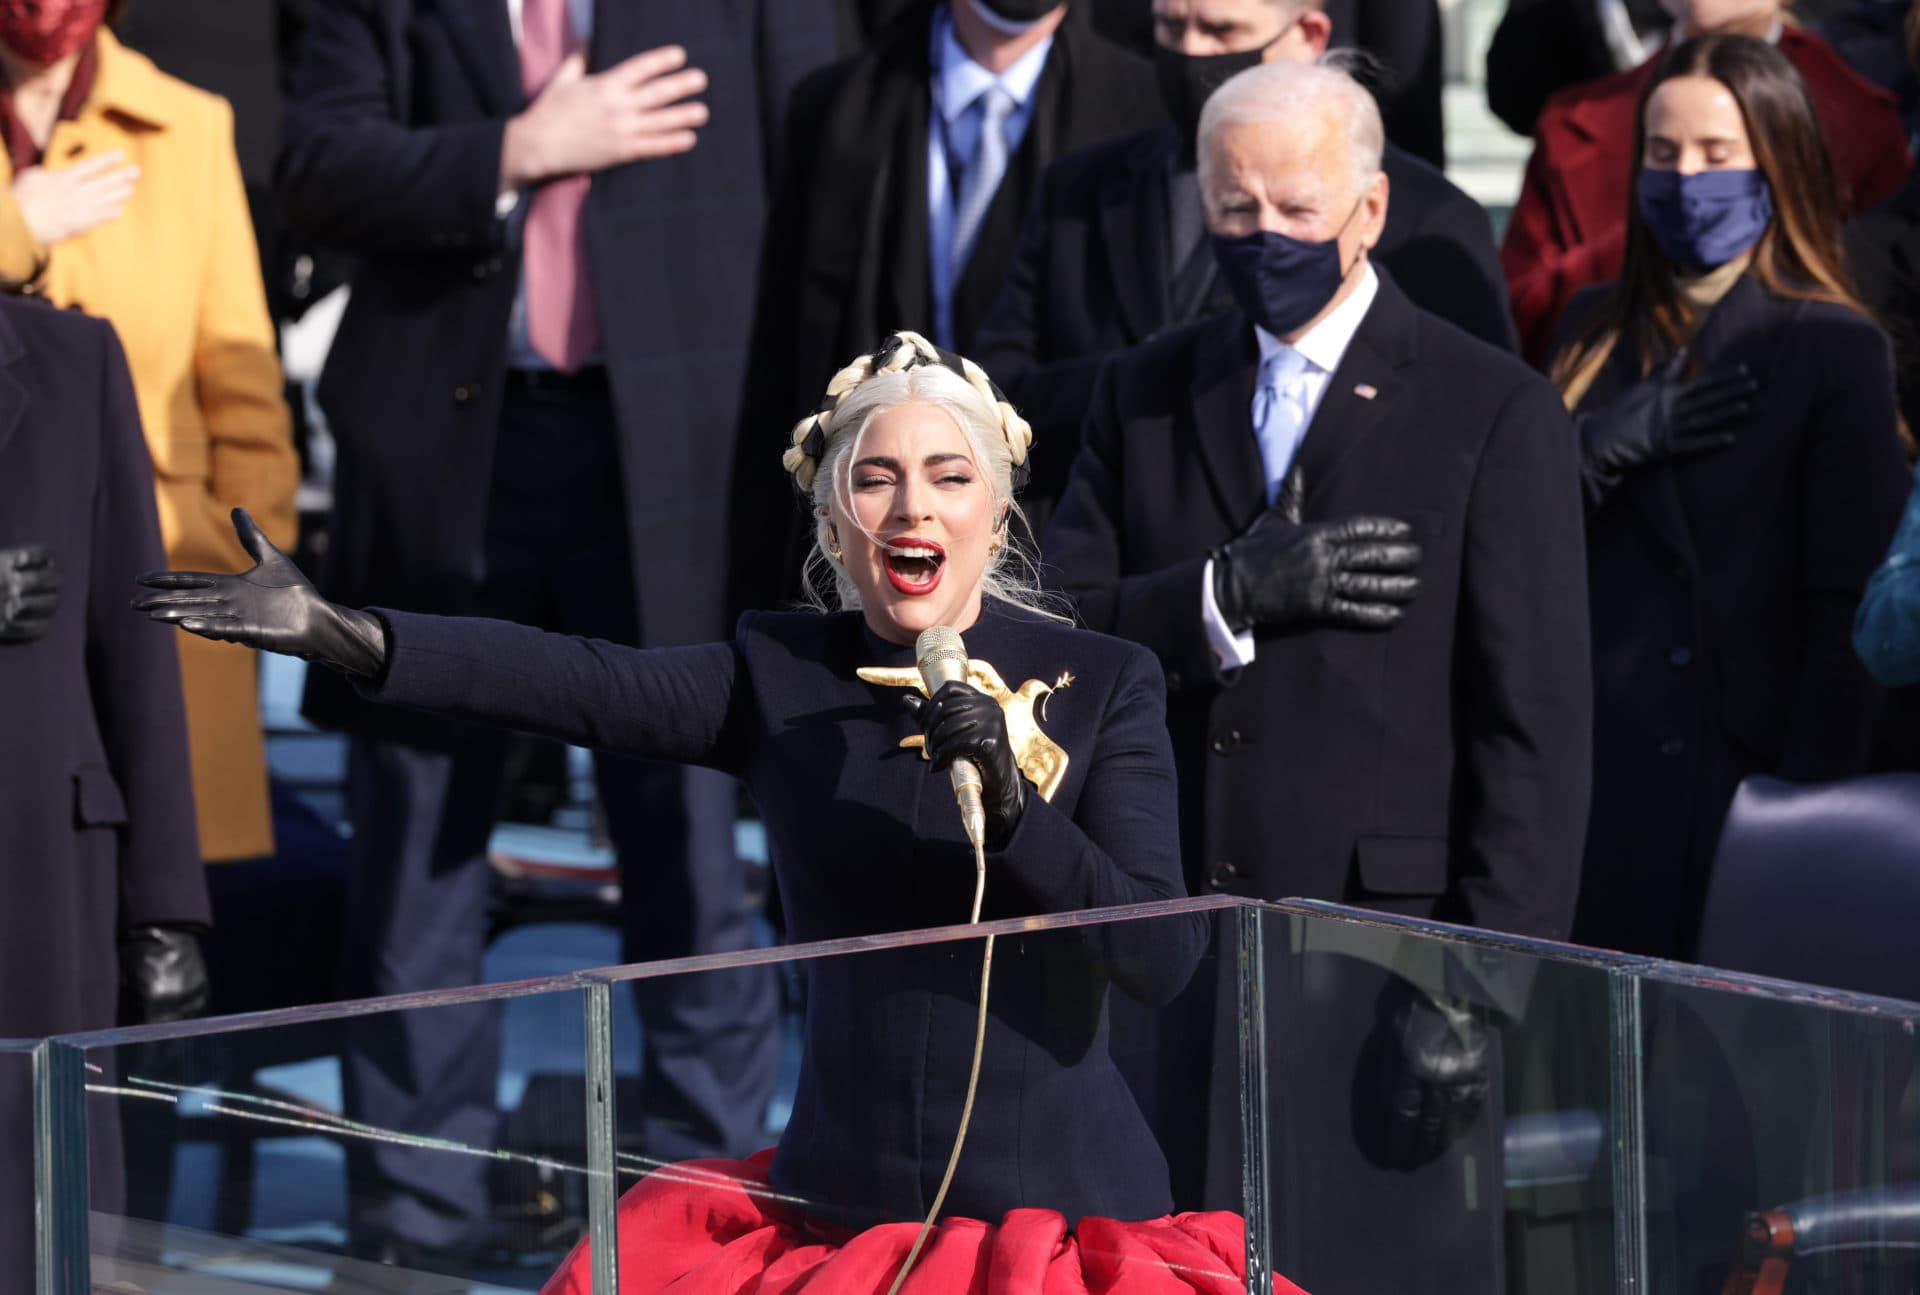 Lady Gaga sings the National Anthem at the inauguration. (Alex Wong/Getty Images)